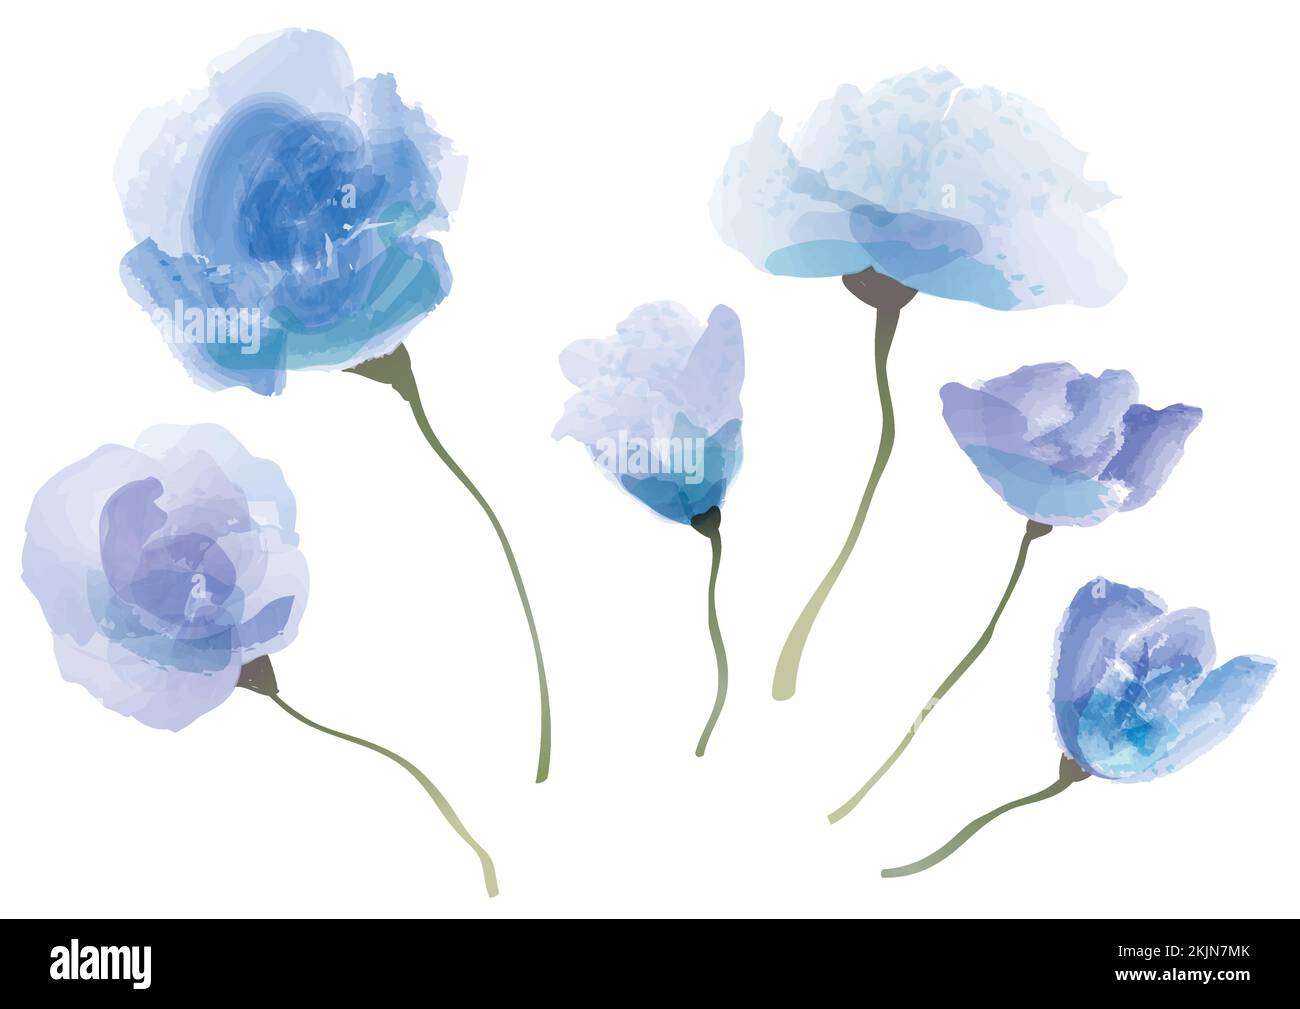 Set Of Botanical Elements Isolated On A White Background. Vector Illustration. Stock Vector